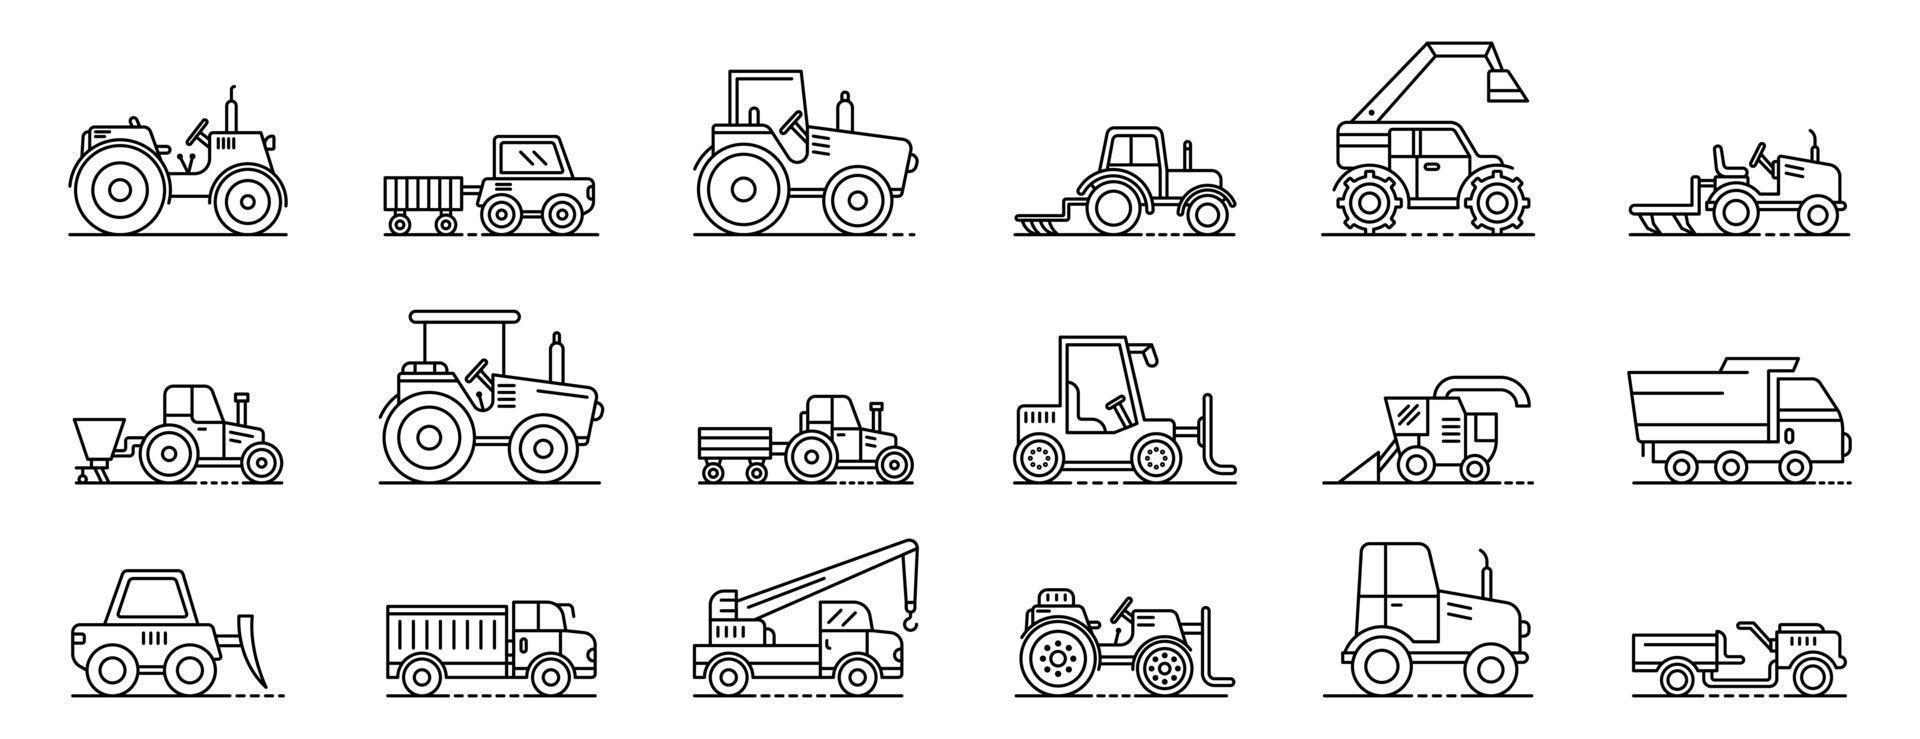 Agricultural machines icons set, outline style vector